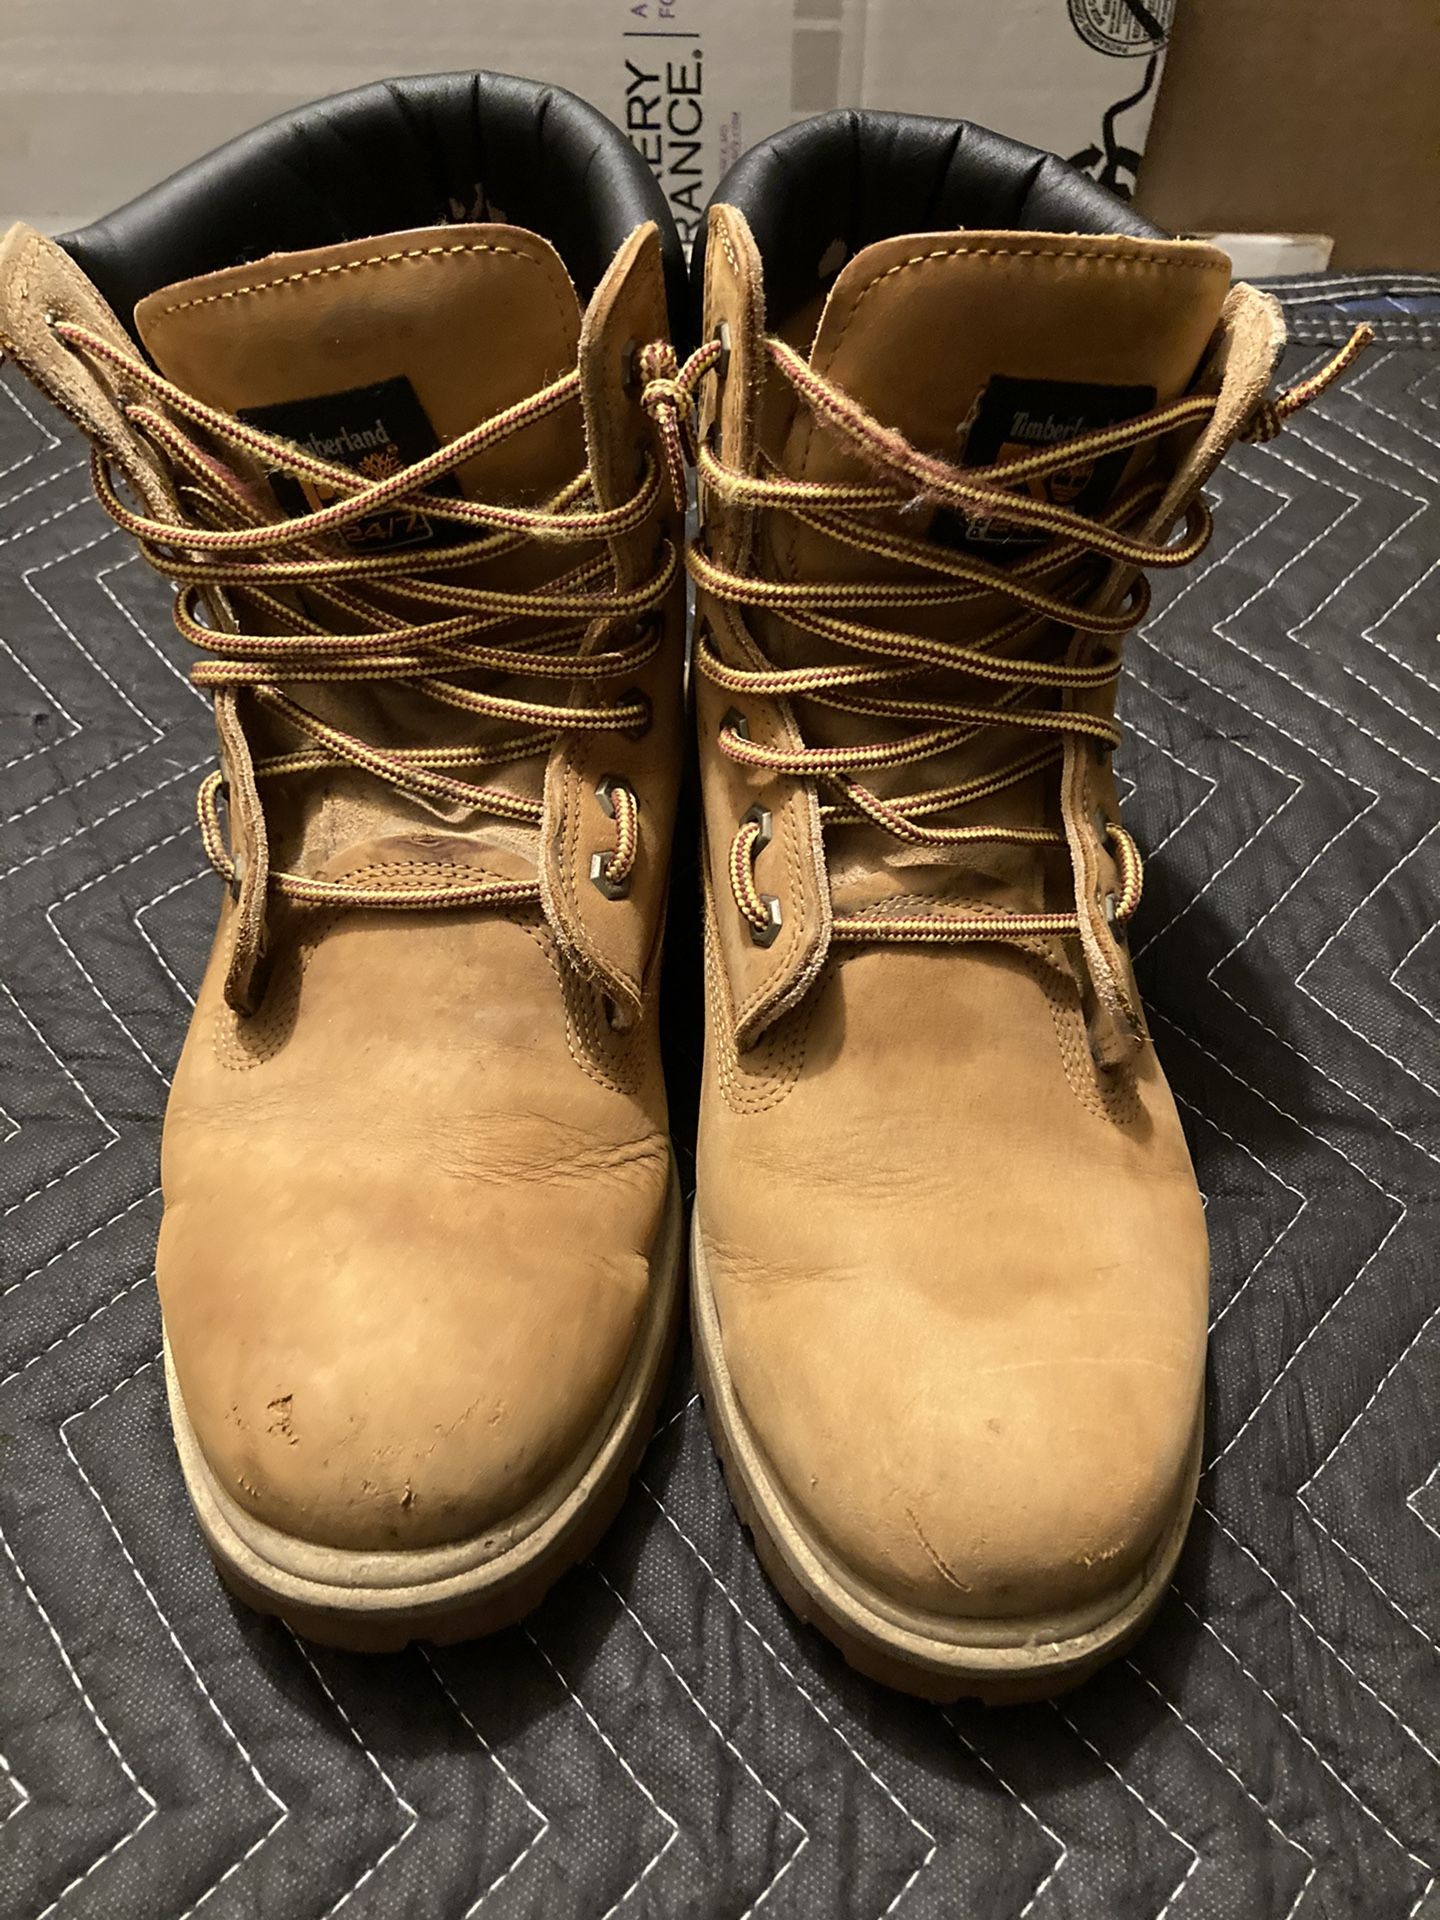 Timberland Pro Work boots men’s 11.5